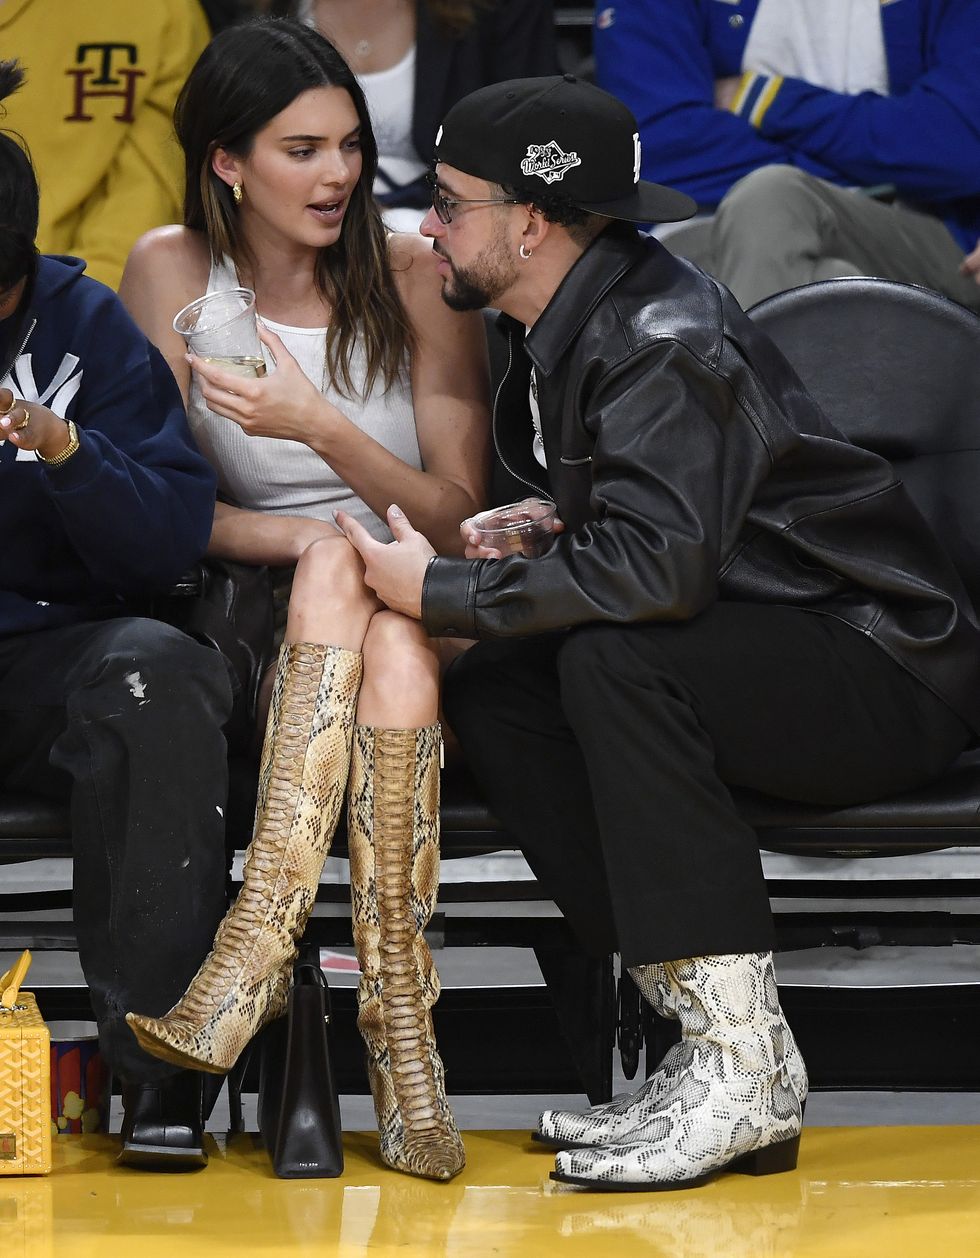 See Kendall Jenner and Bad Bunny Coordinate Their Looks In First